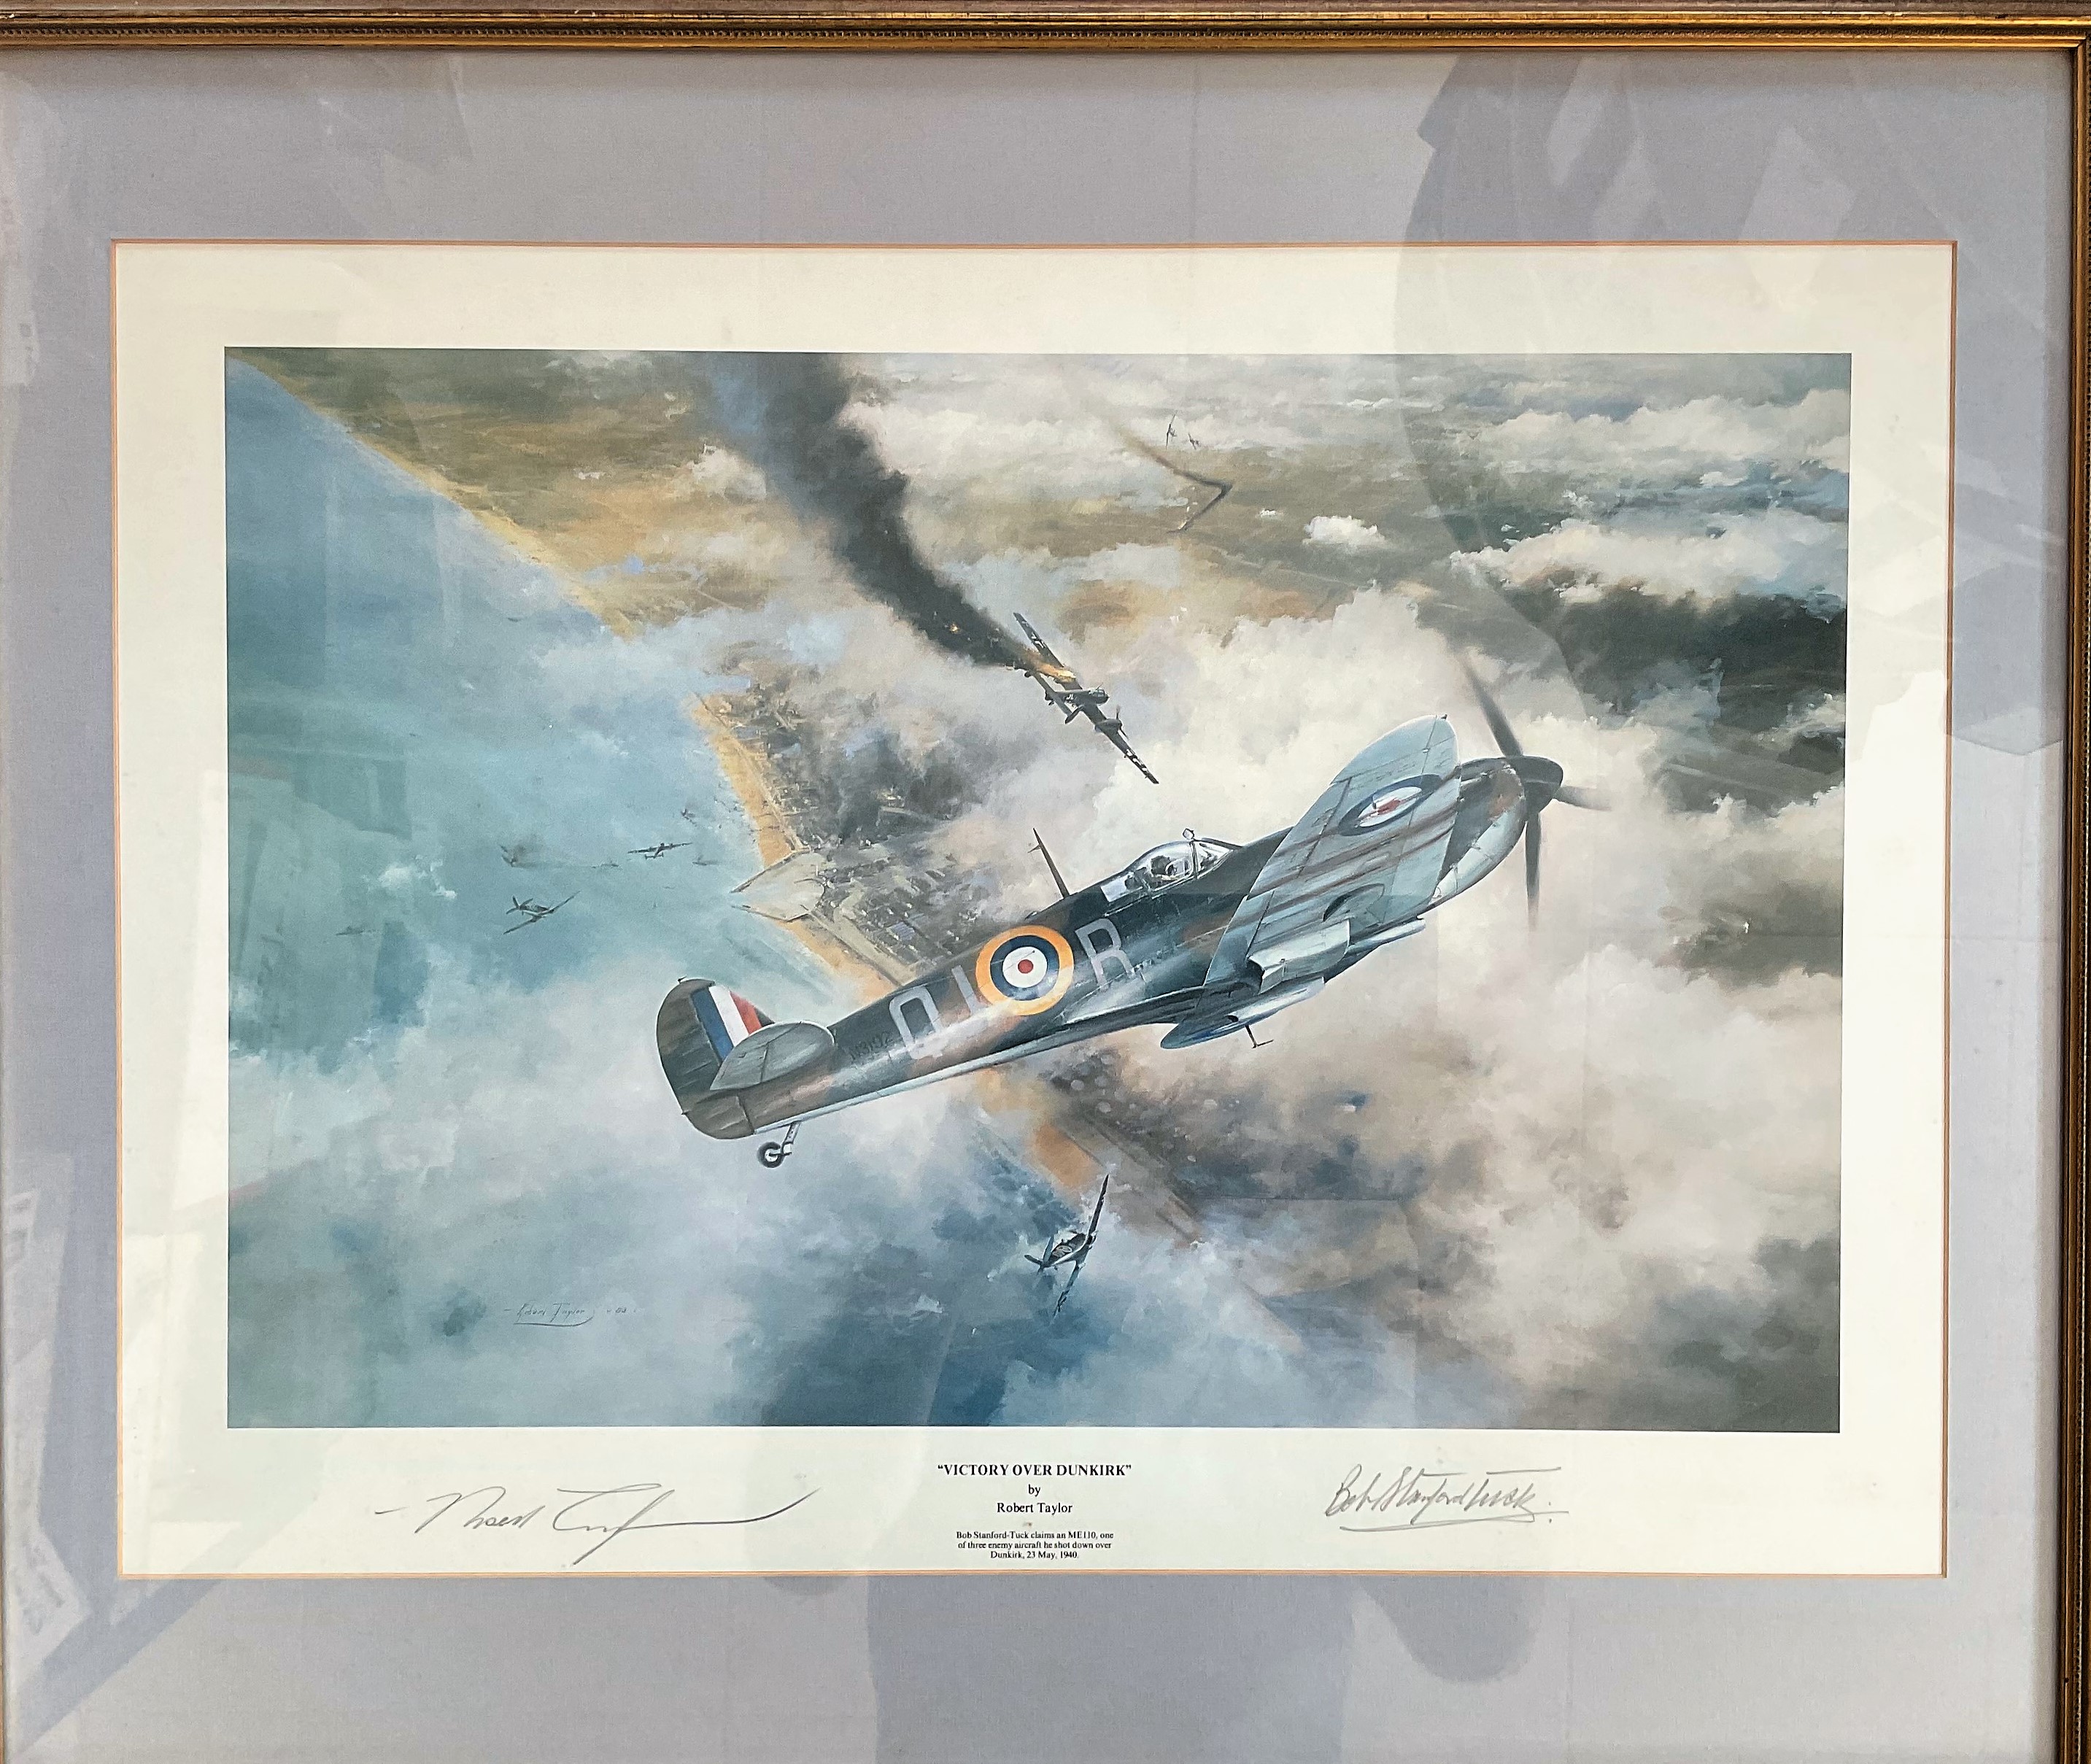 Robert Stanford-Tuck Signed Robert Taylor Print. Titled "Victory Over Dunkirk". Also signed by the